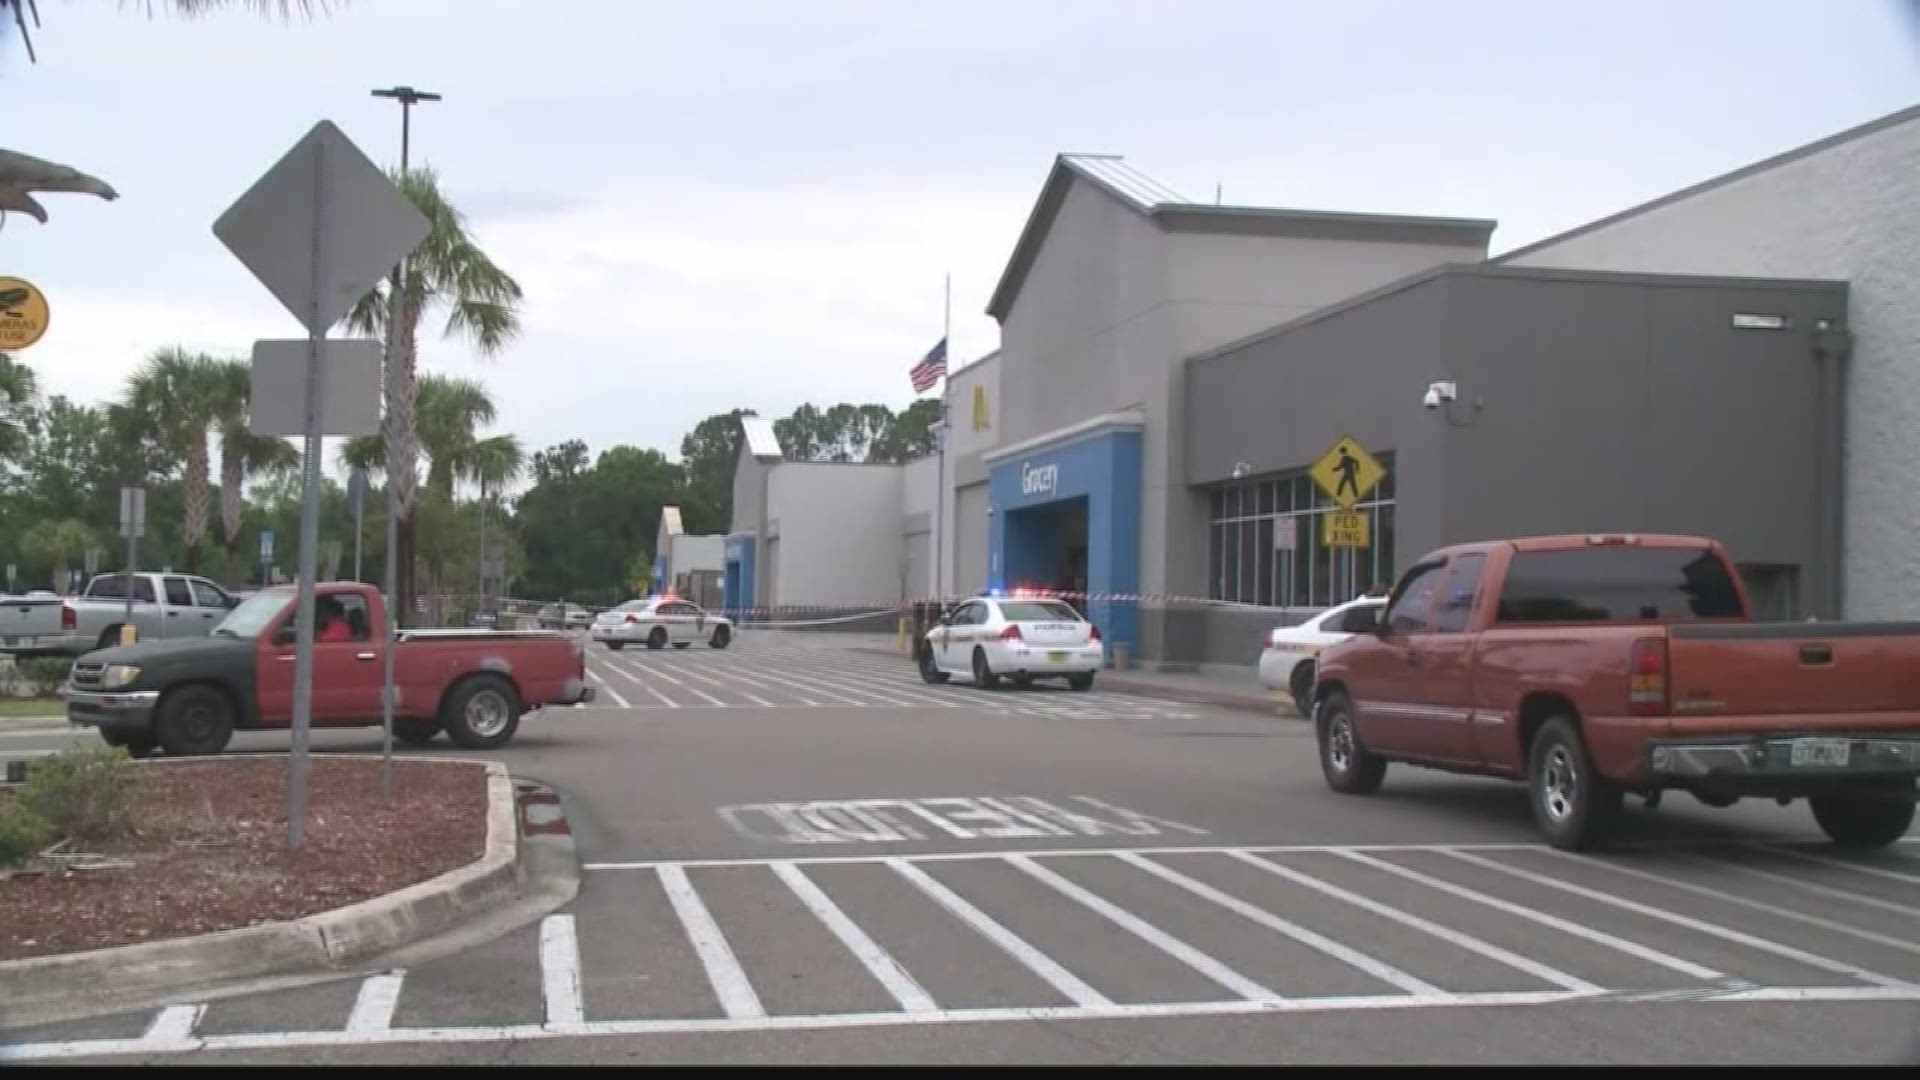 A man was shot in the parking lot of a Walmart on 103rd Street Tuesday on the Westside.